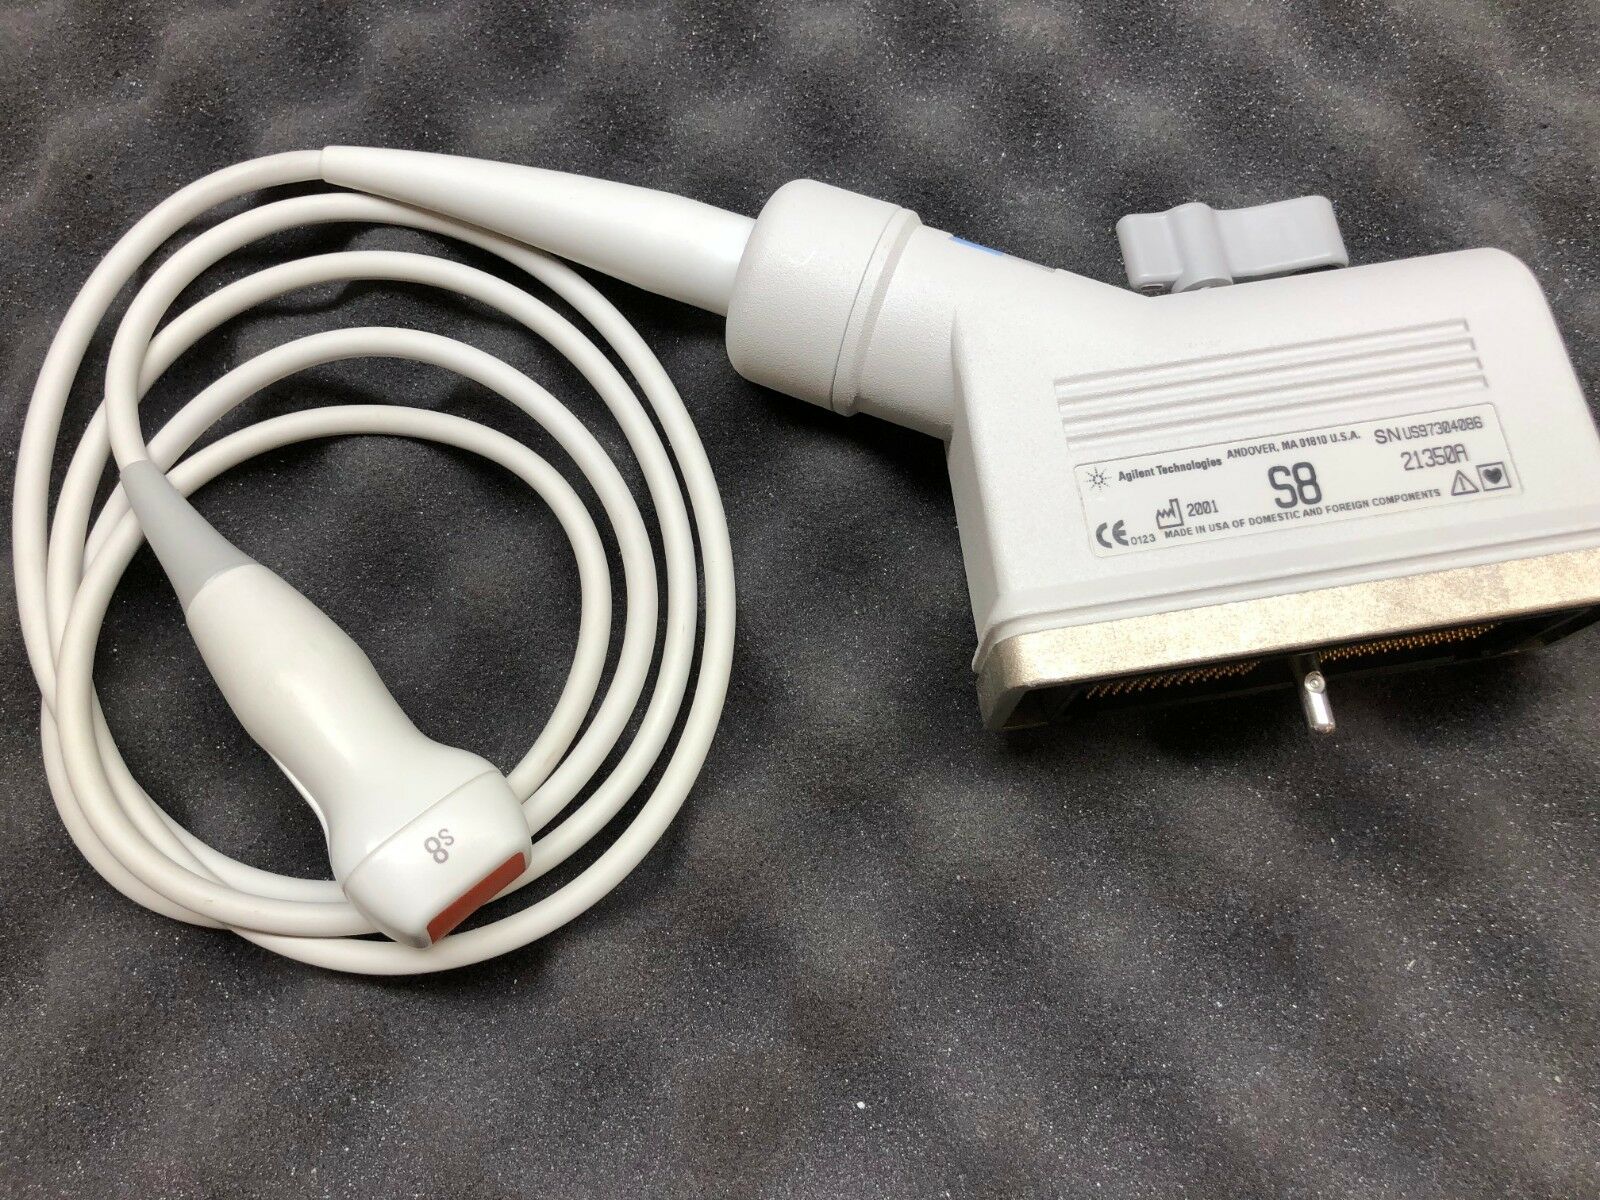 21350A PHILIPS HP S8 Sector Array Ultrasound Transducer Probe